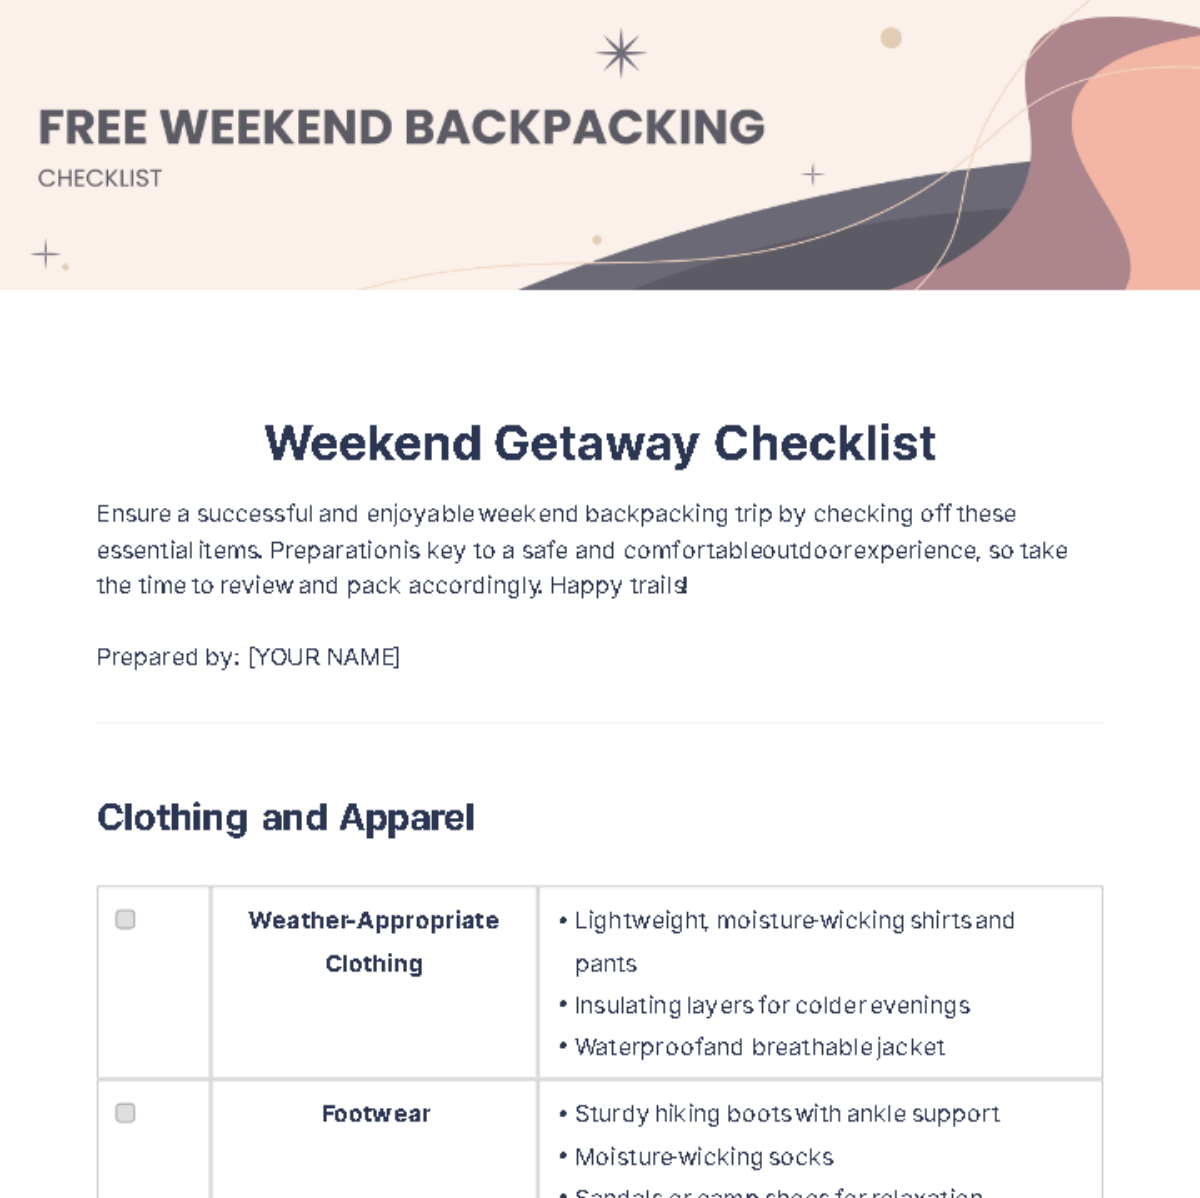 Free Weekend Backpacking Checklist Template